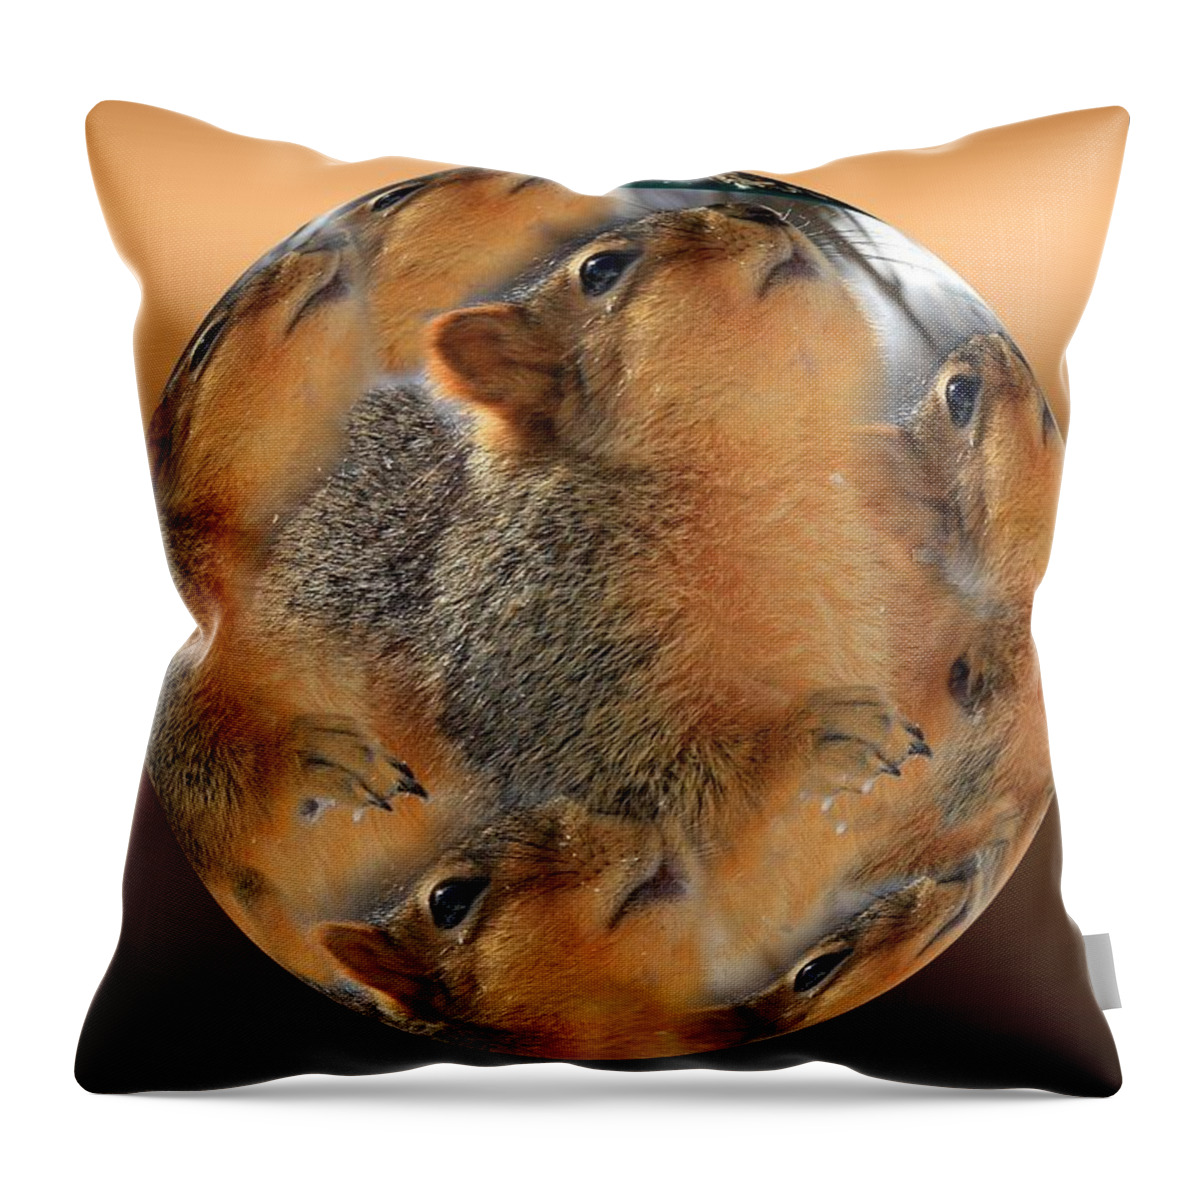 Squirrel Throw Pillow featuring the photograph Squirrel in a Ball by Rick Rauzi